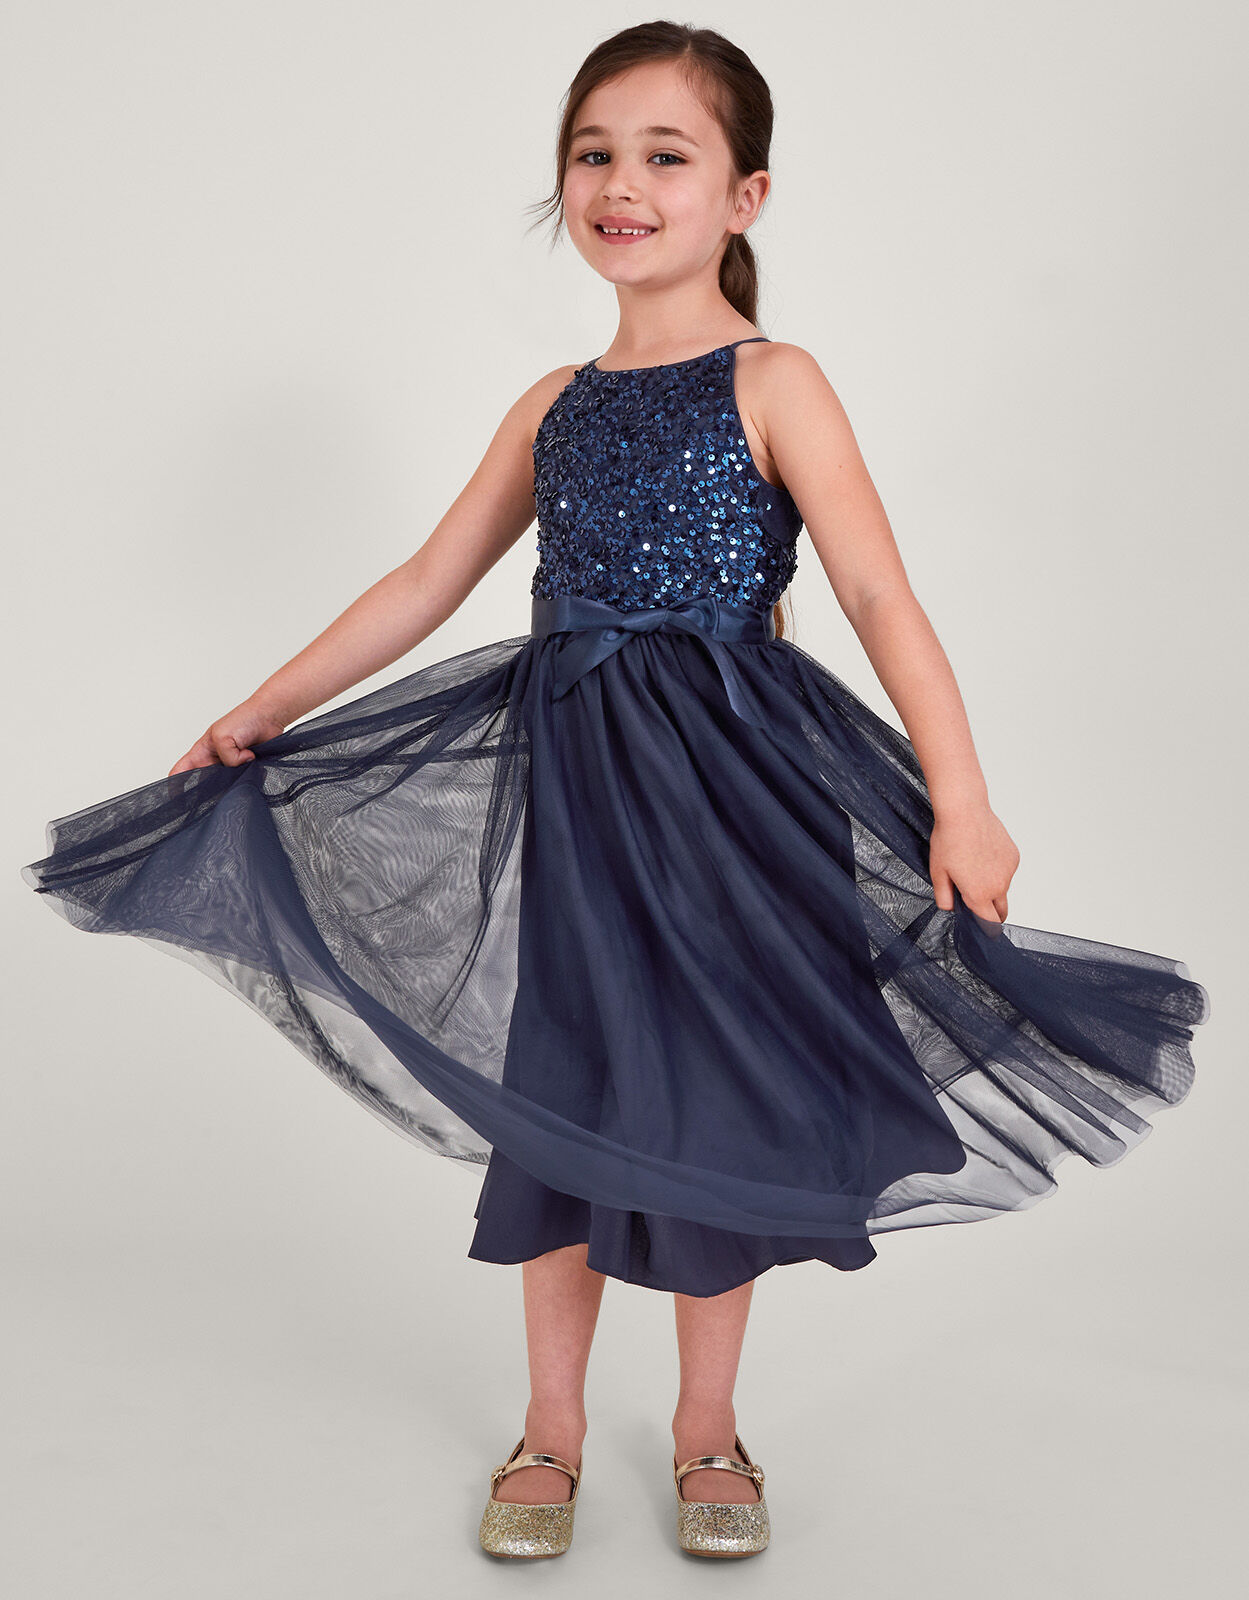 13 Years Girl Dress Designs - 20 Latest and Cute Models